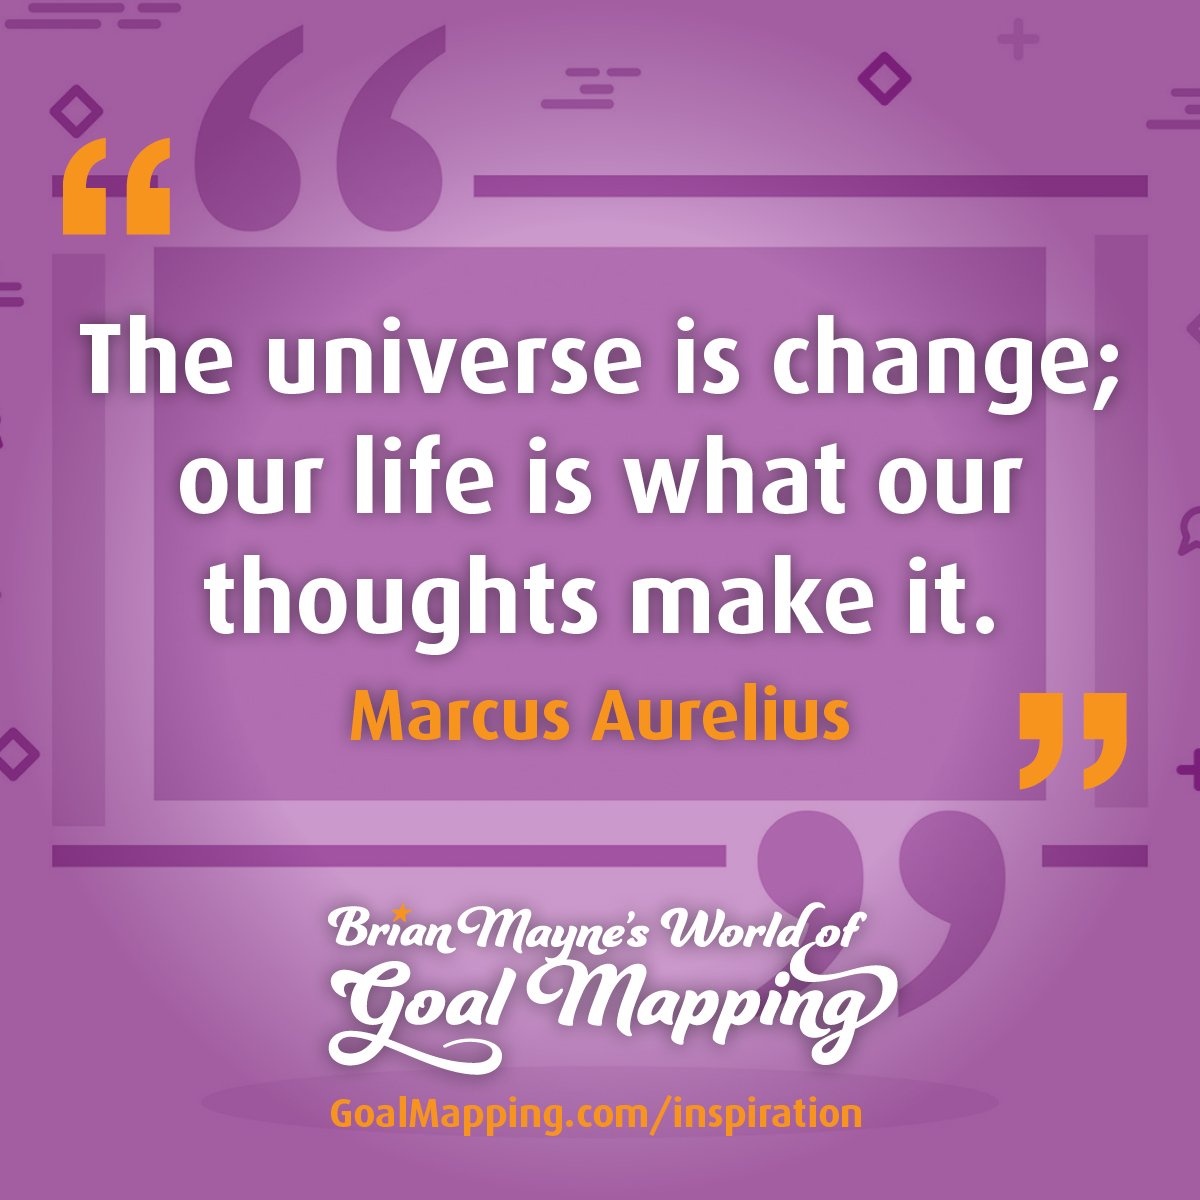 "The universe is change; our life is what our thoughts make it." Marcus Aurelius